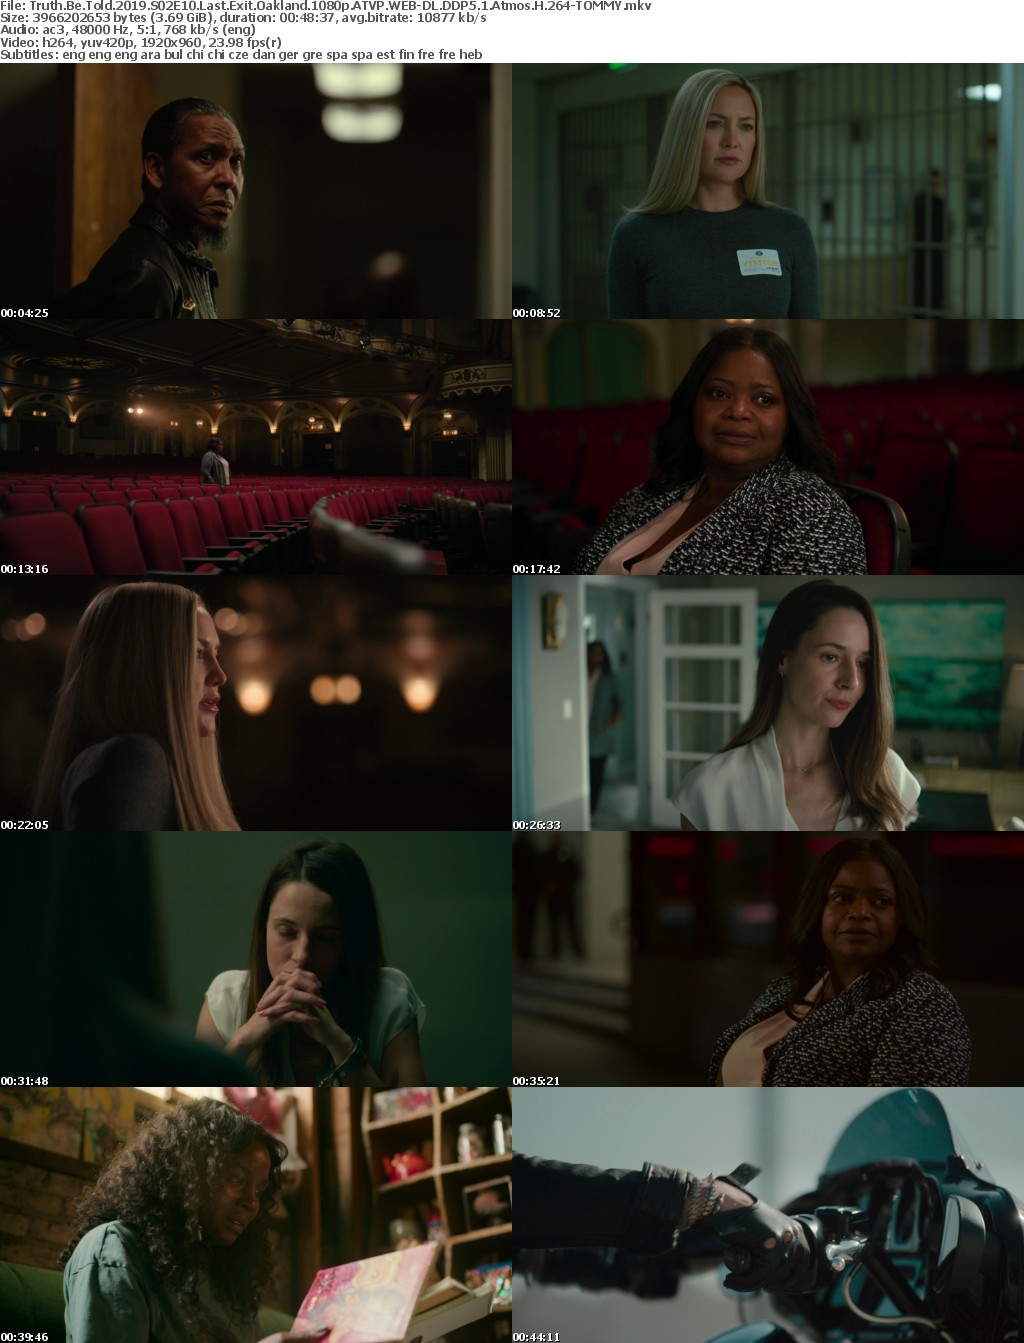 Truth Be Told 2019 S02E10 Last Exit Oakland 1080p ATVP WEBRip DDP5 1 x264-TOMMY